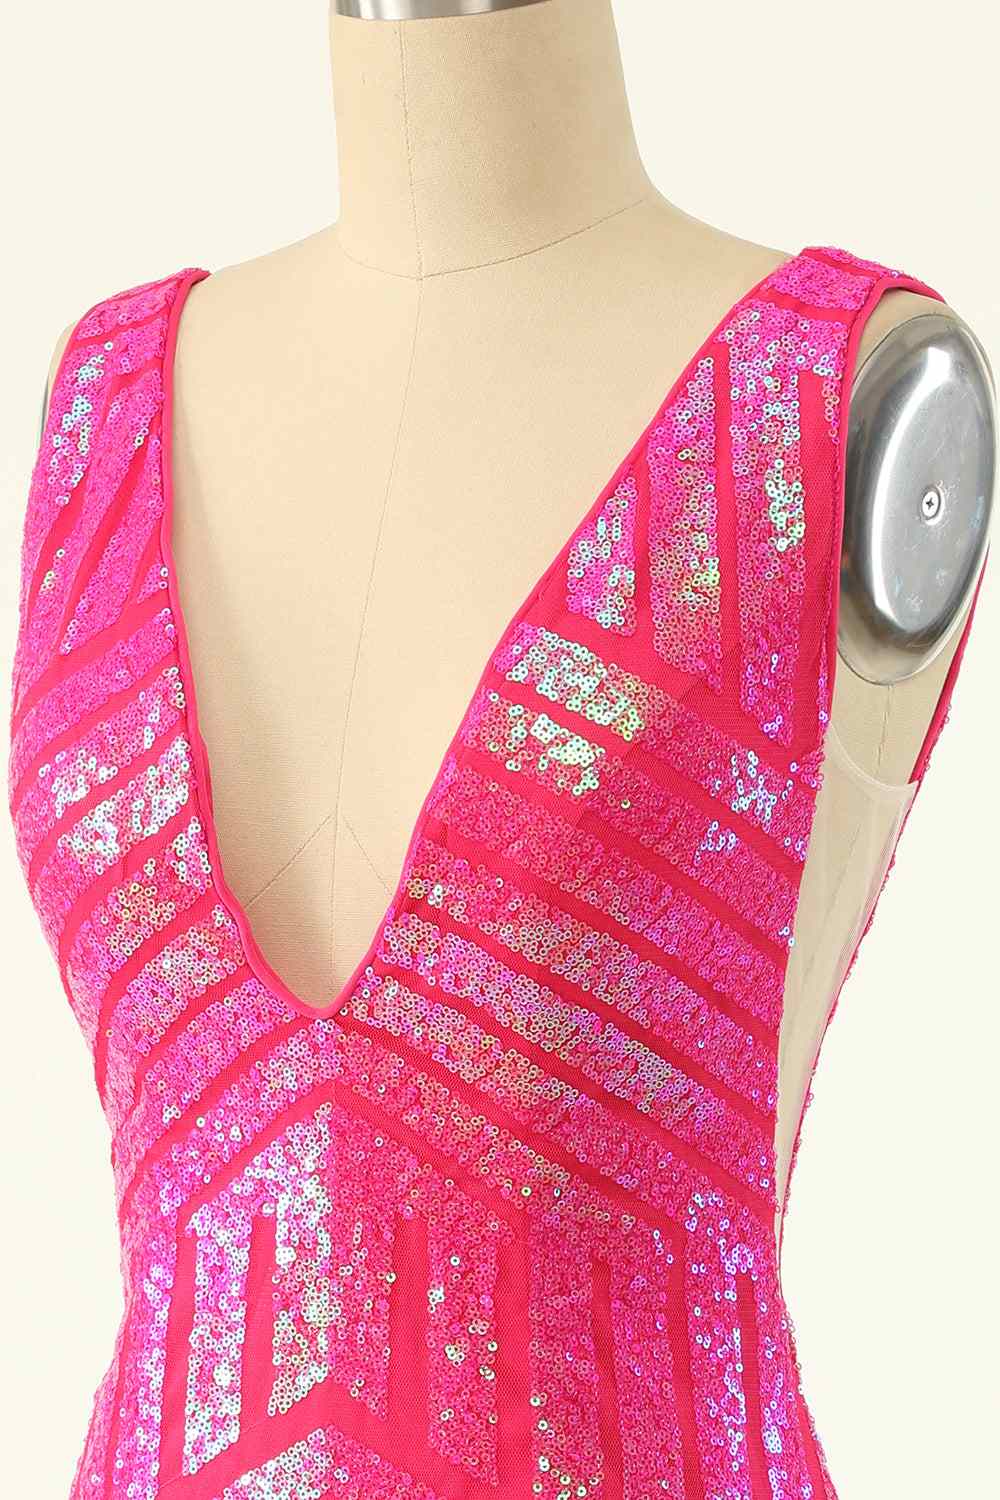 Hot Pink Sheath V Neck Sequin-Embroidered Mini Homecoming Dress